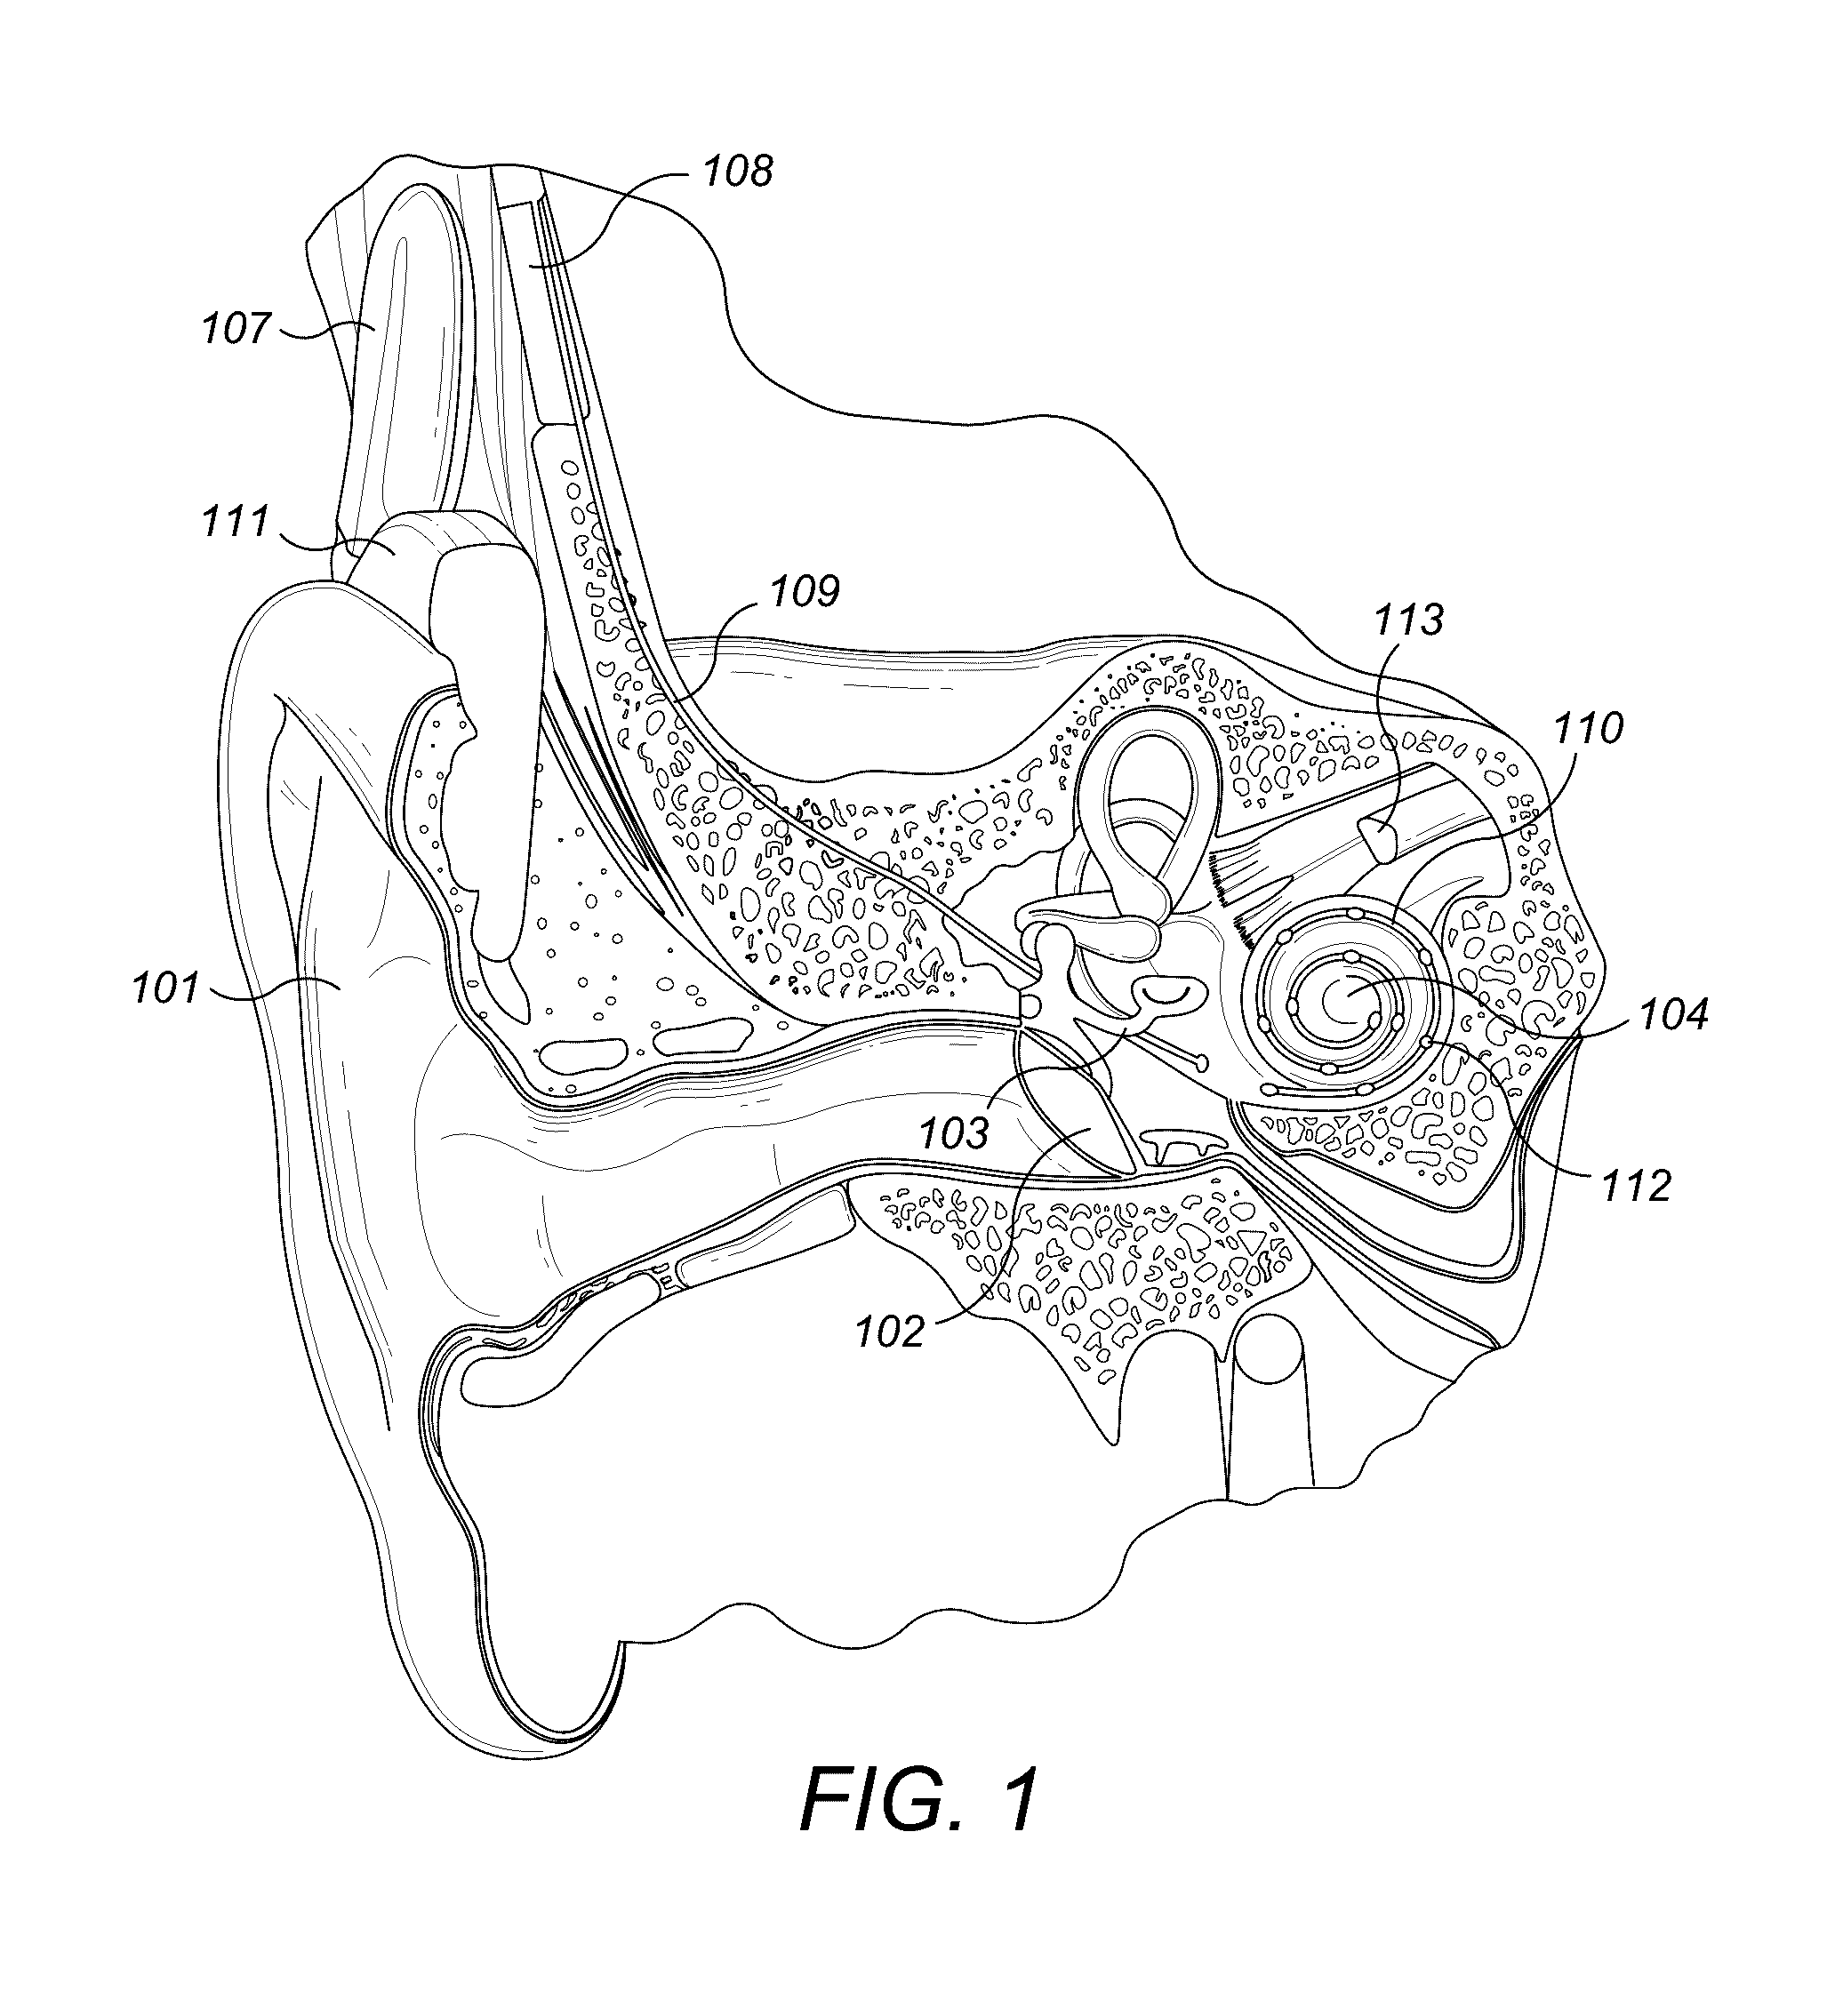 Modified electrode lead for cochlear implants